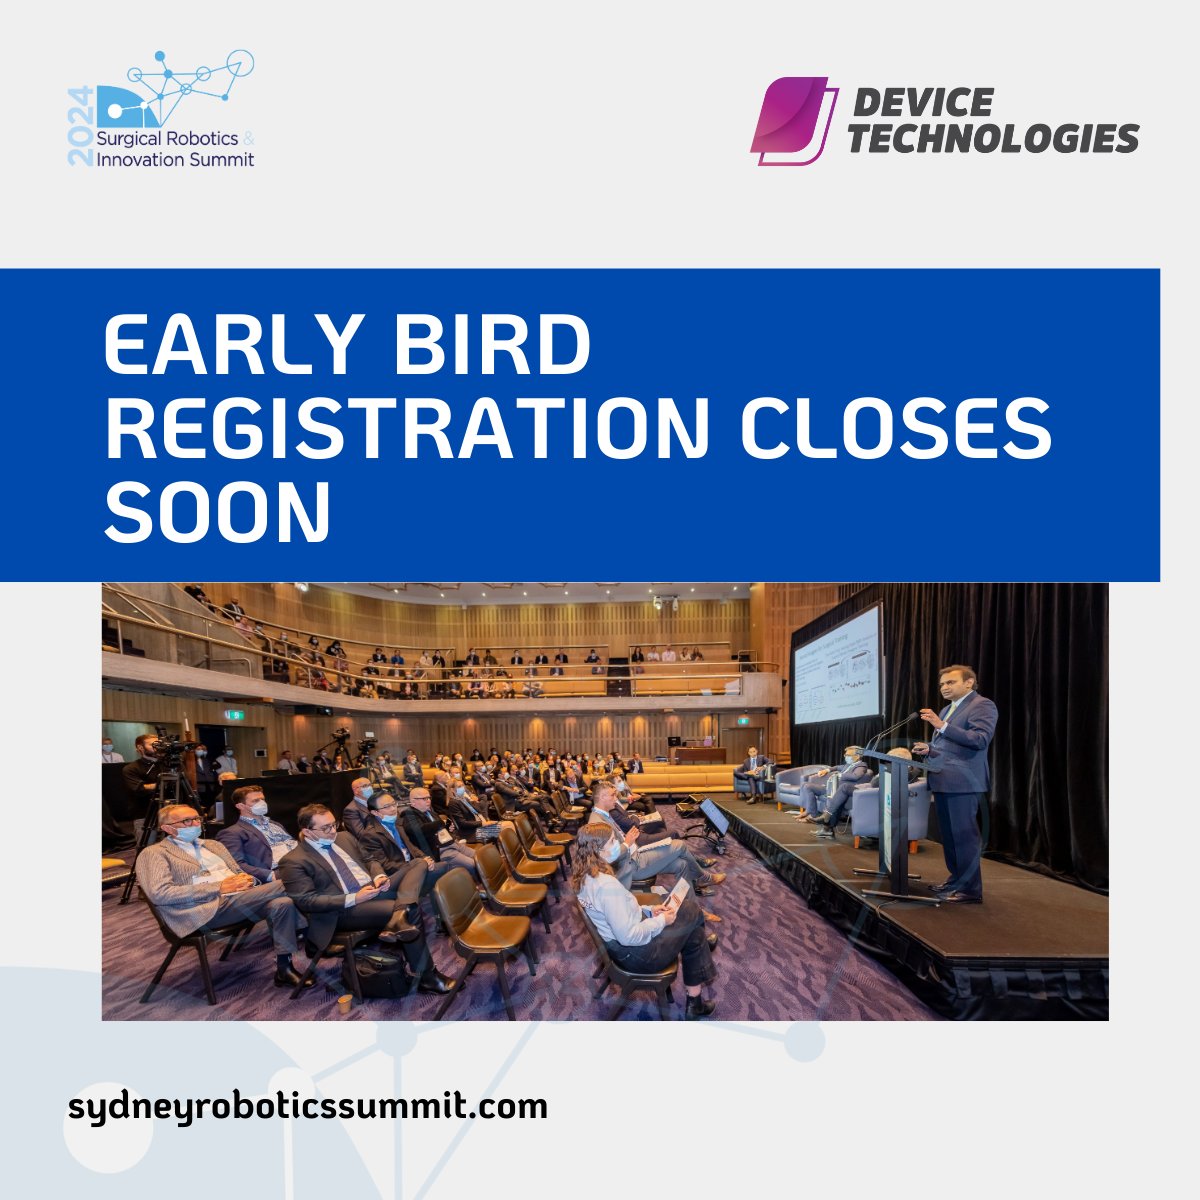 Only a few days left till #SRIS2024 early bird registration closes on Tuesday 30 April 2024. Discount tickets are available for undergrad students, JMO's, nursing, GP's, allied health, administration, registrars, trainees and fellows. Register today: sydneyroboticssummit.com/registration